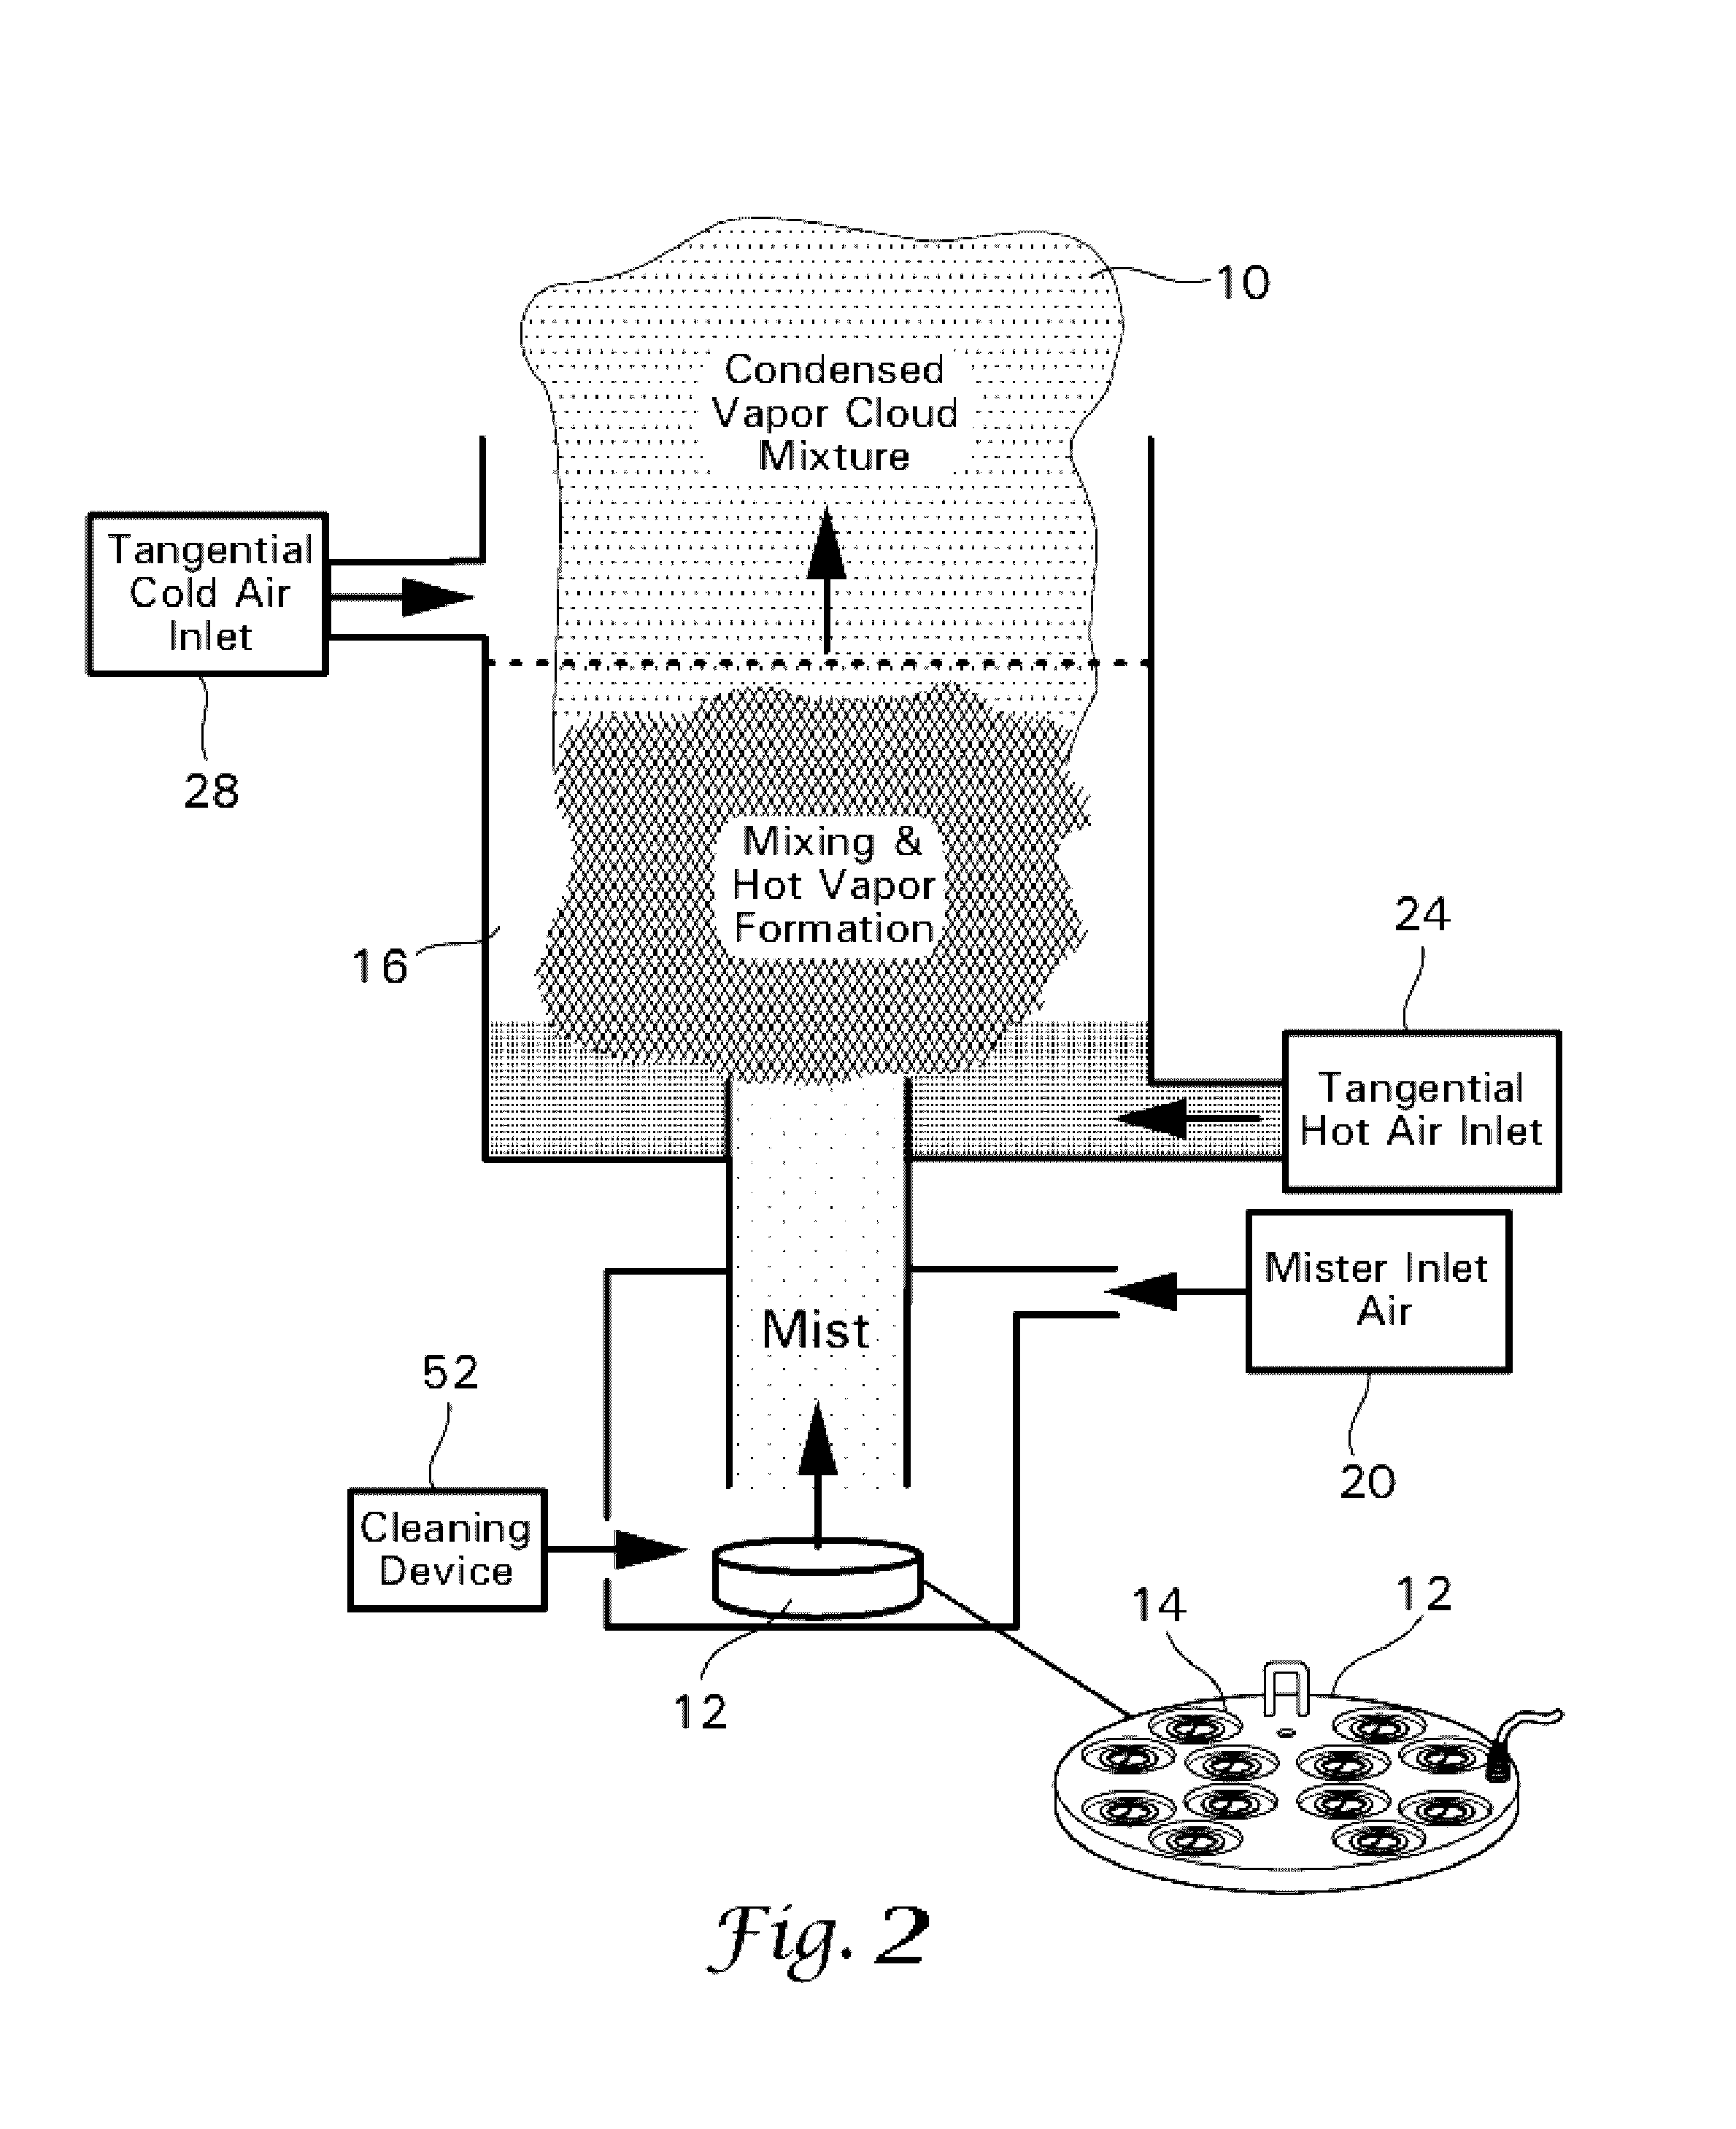 Device and method for decontamination, disinfection, and sanitation